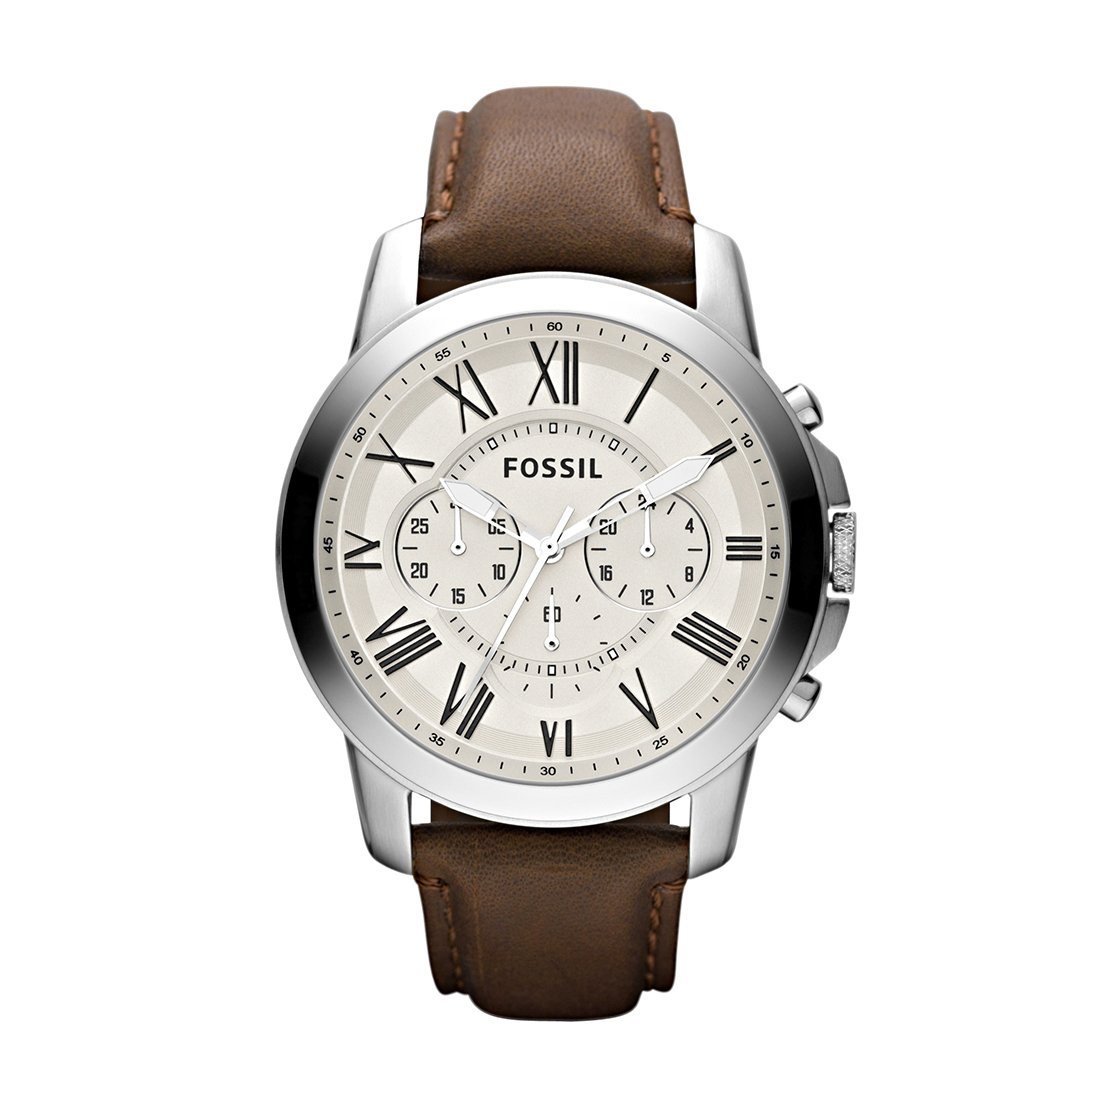 Fossil Men's Leather Watch Model - FS4735 Watches Fossil 